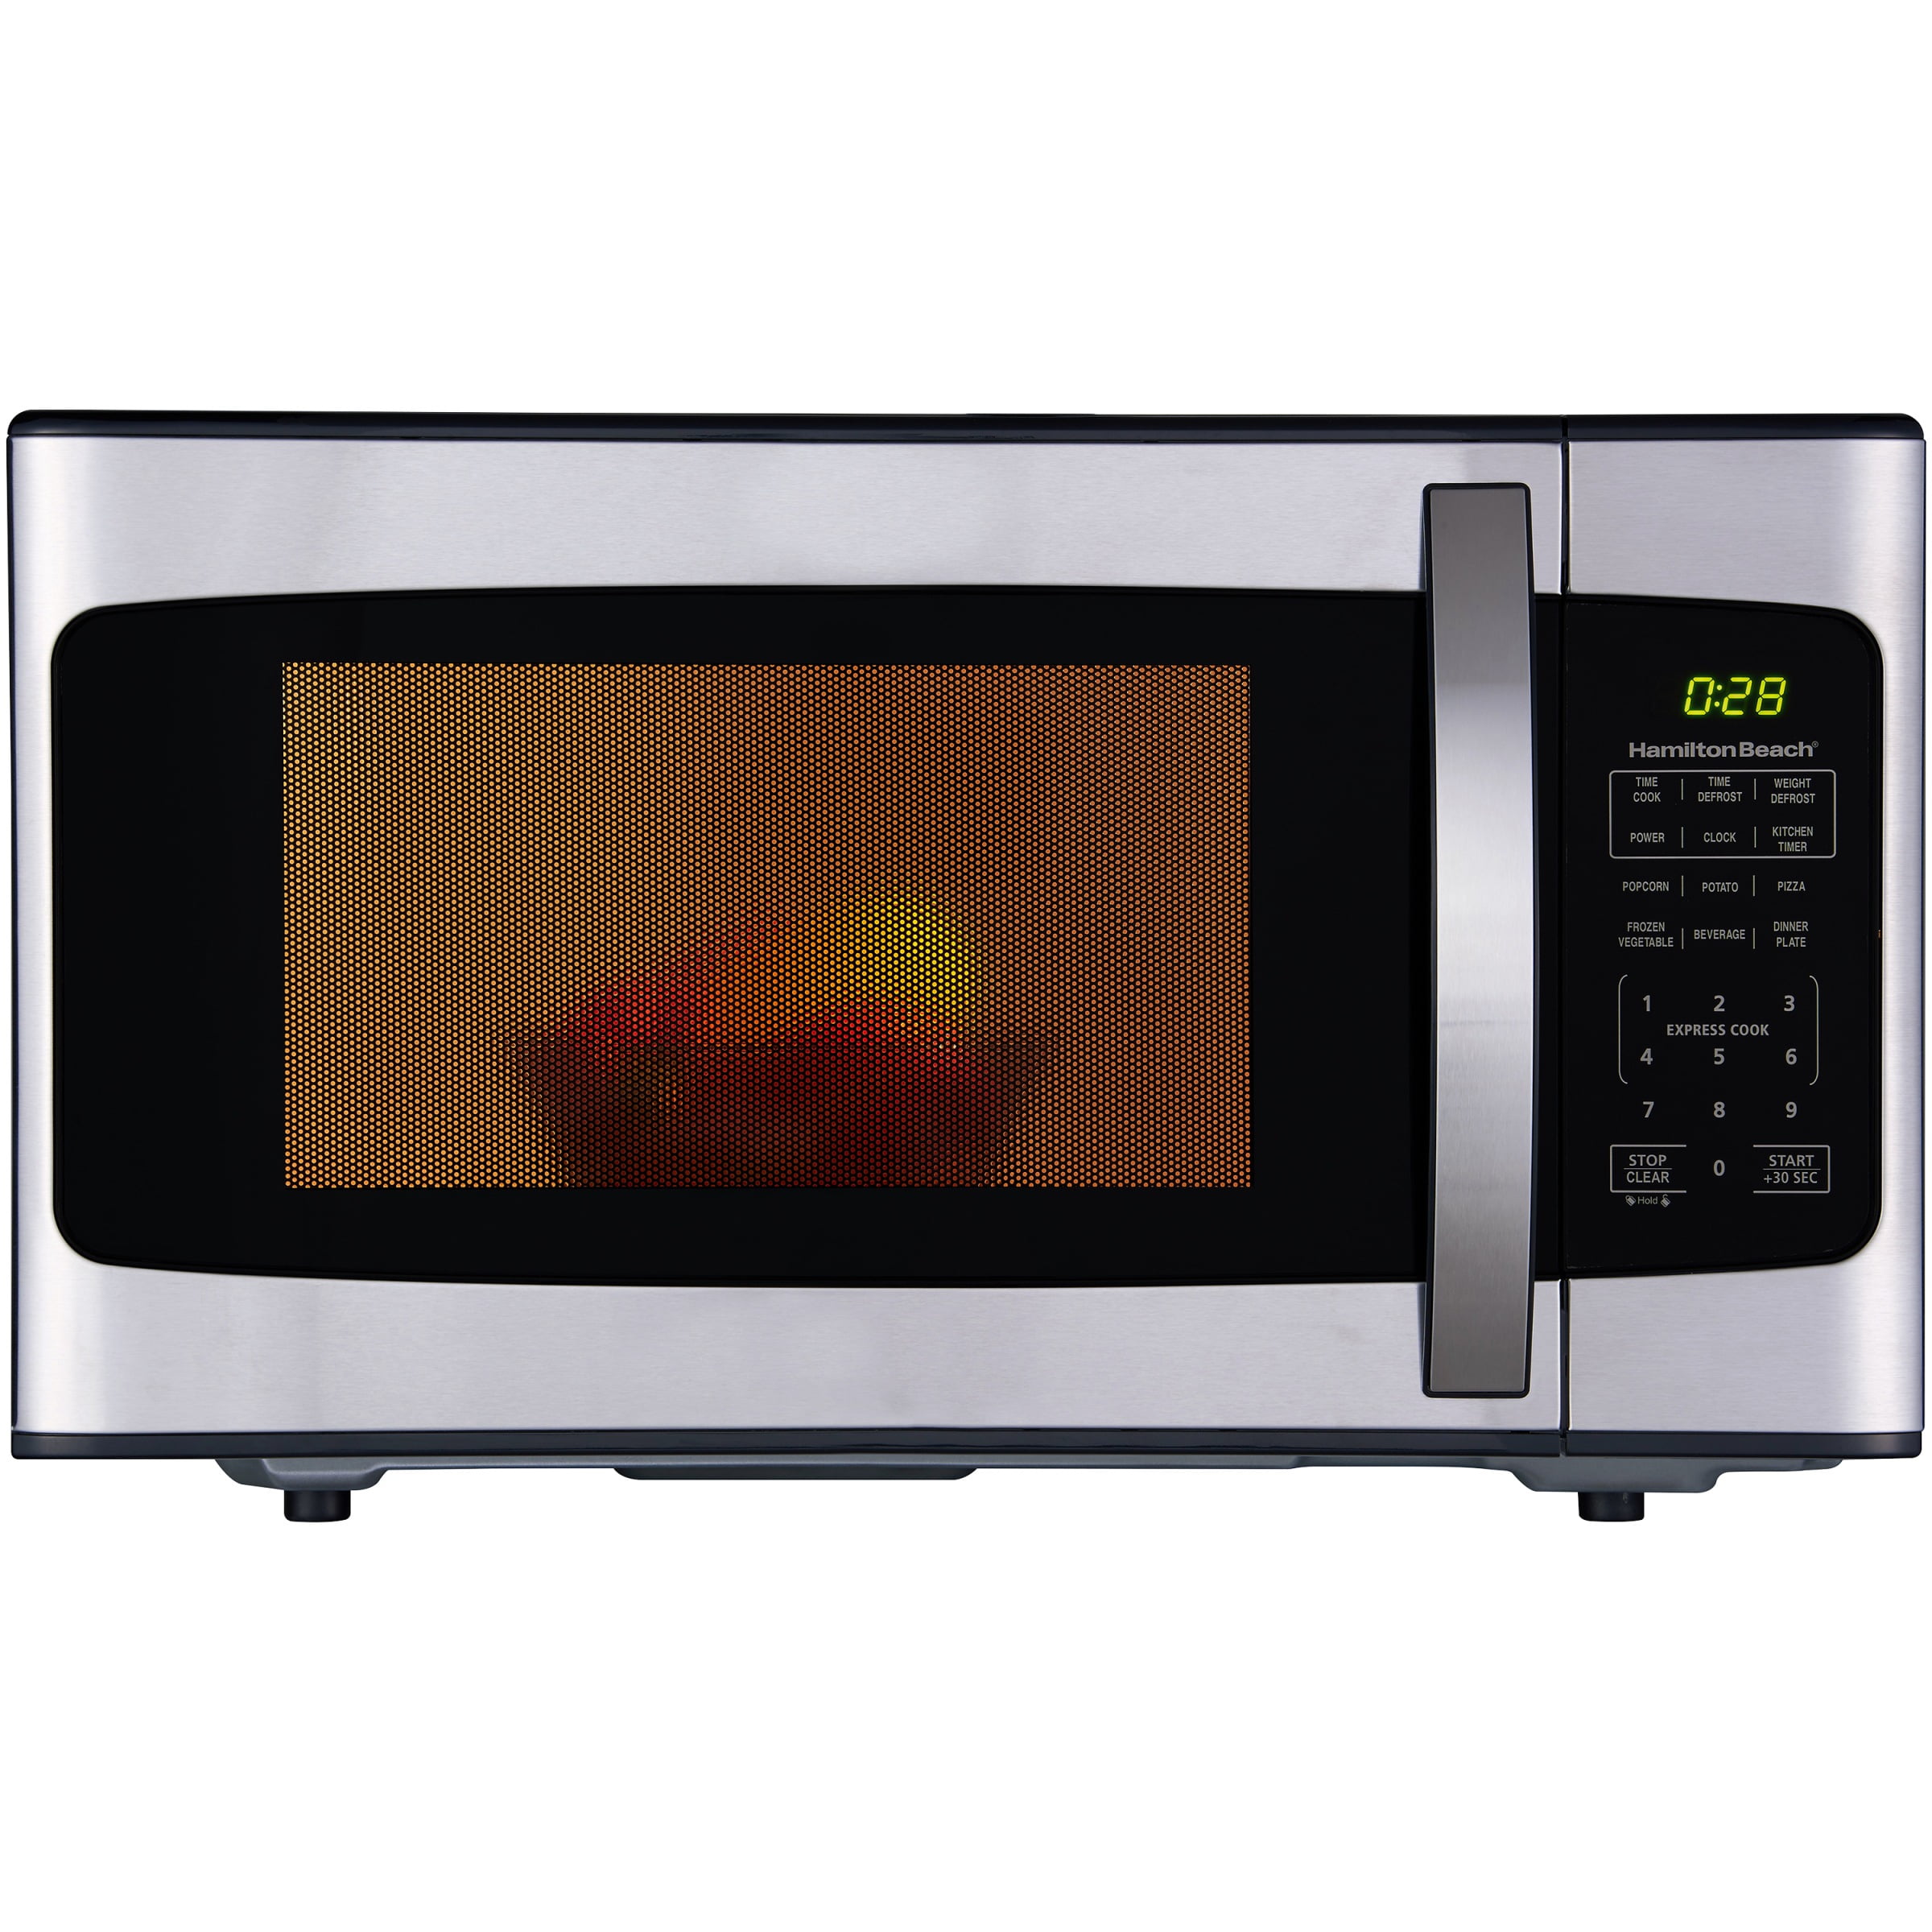 1.1 Cubic Foot Copper Finish Microwave 